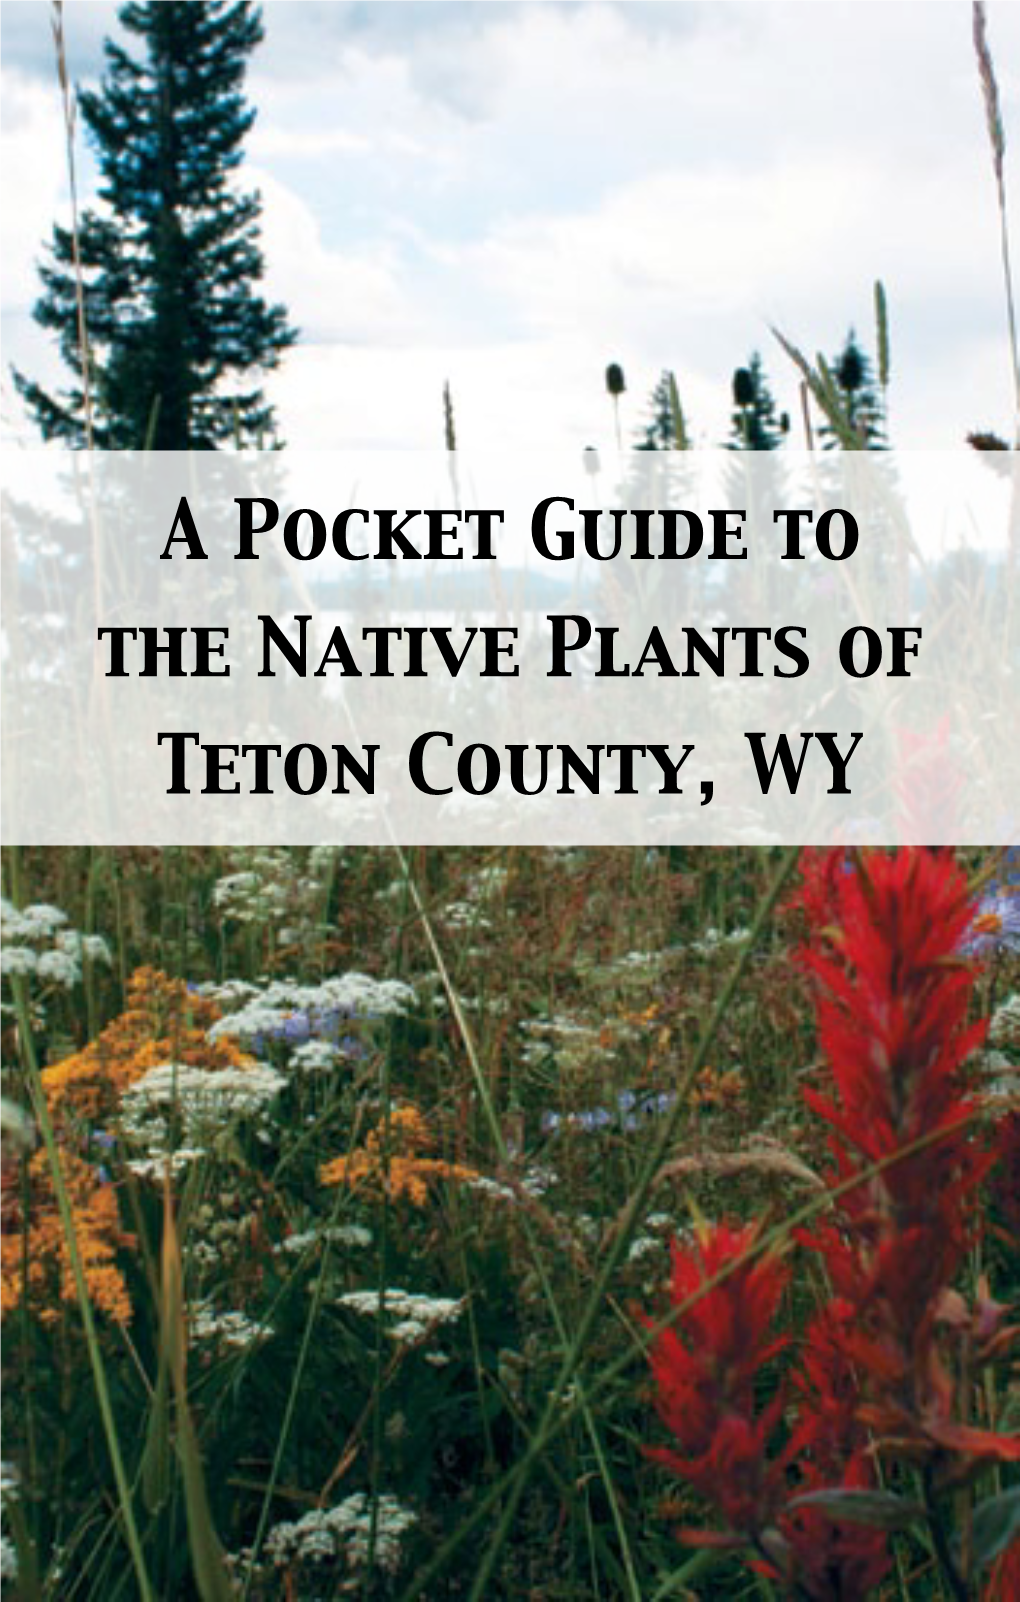 A Pocket Guide to the Native Plants of Teton County, WY